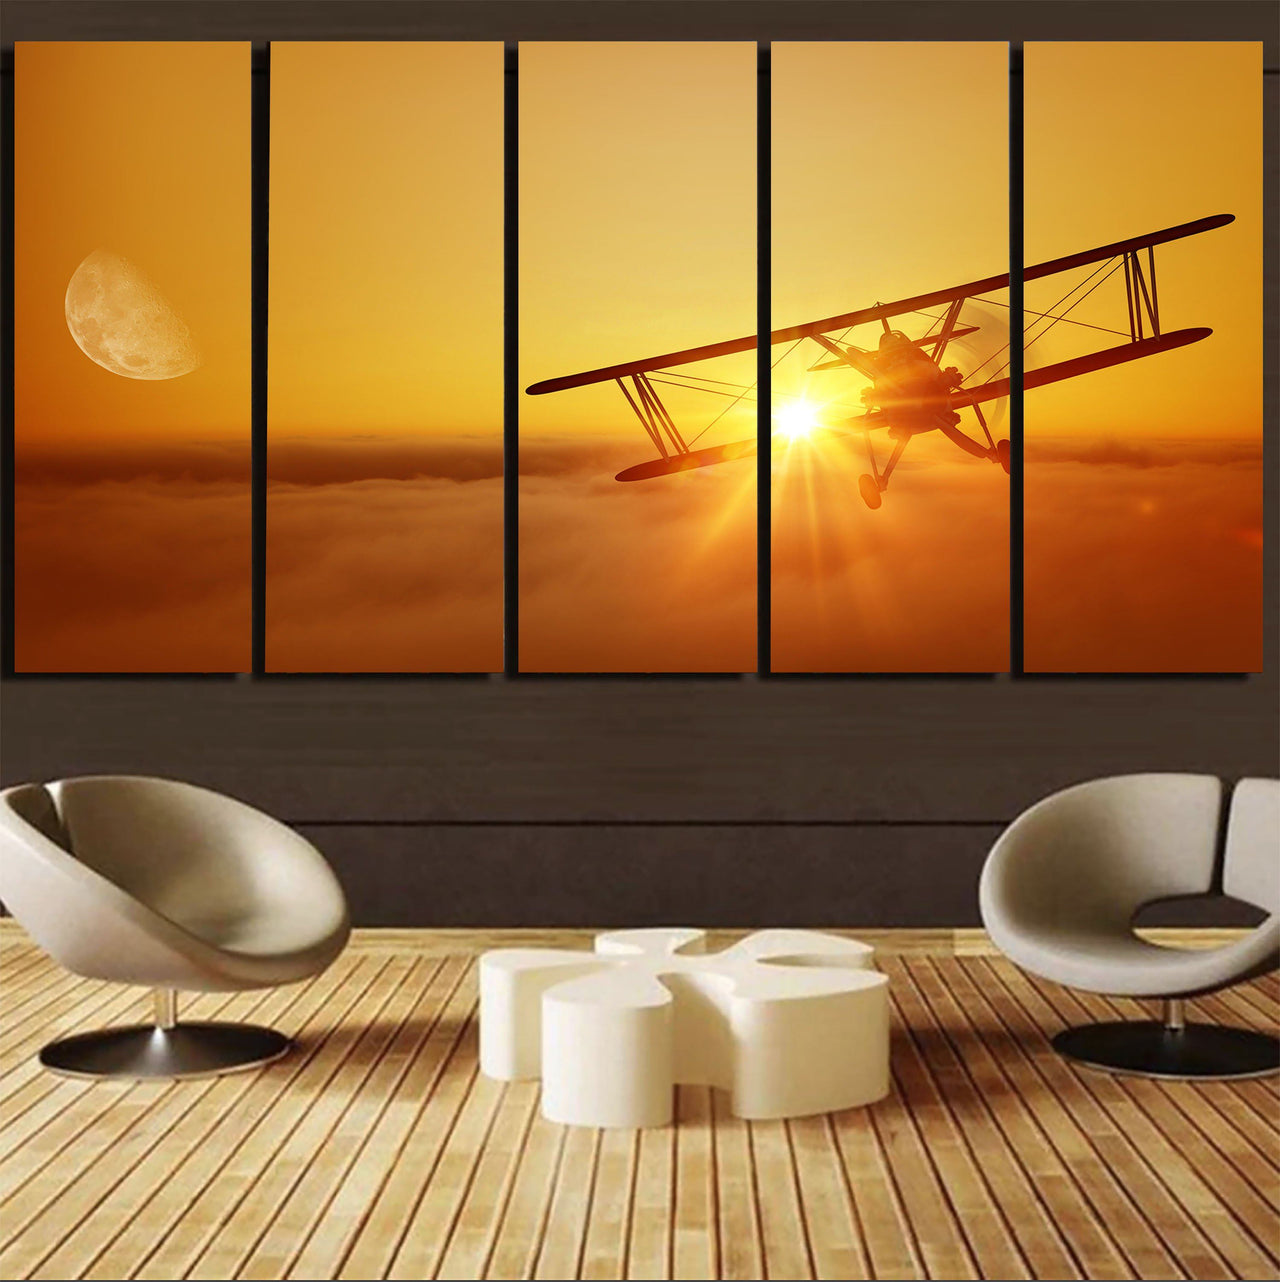 Flying is an Adventure Printed Canvas Prints (5 Pieces) Aviation Shop 